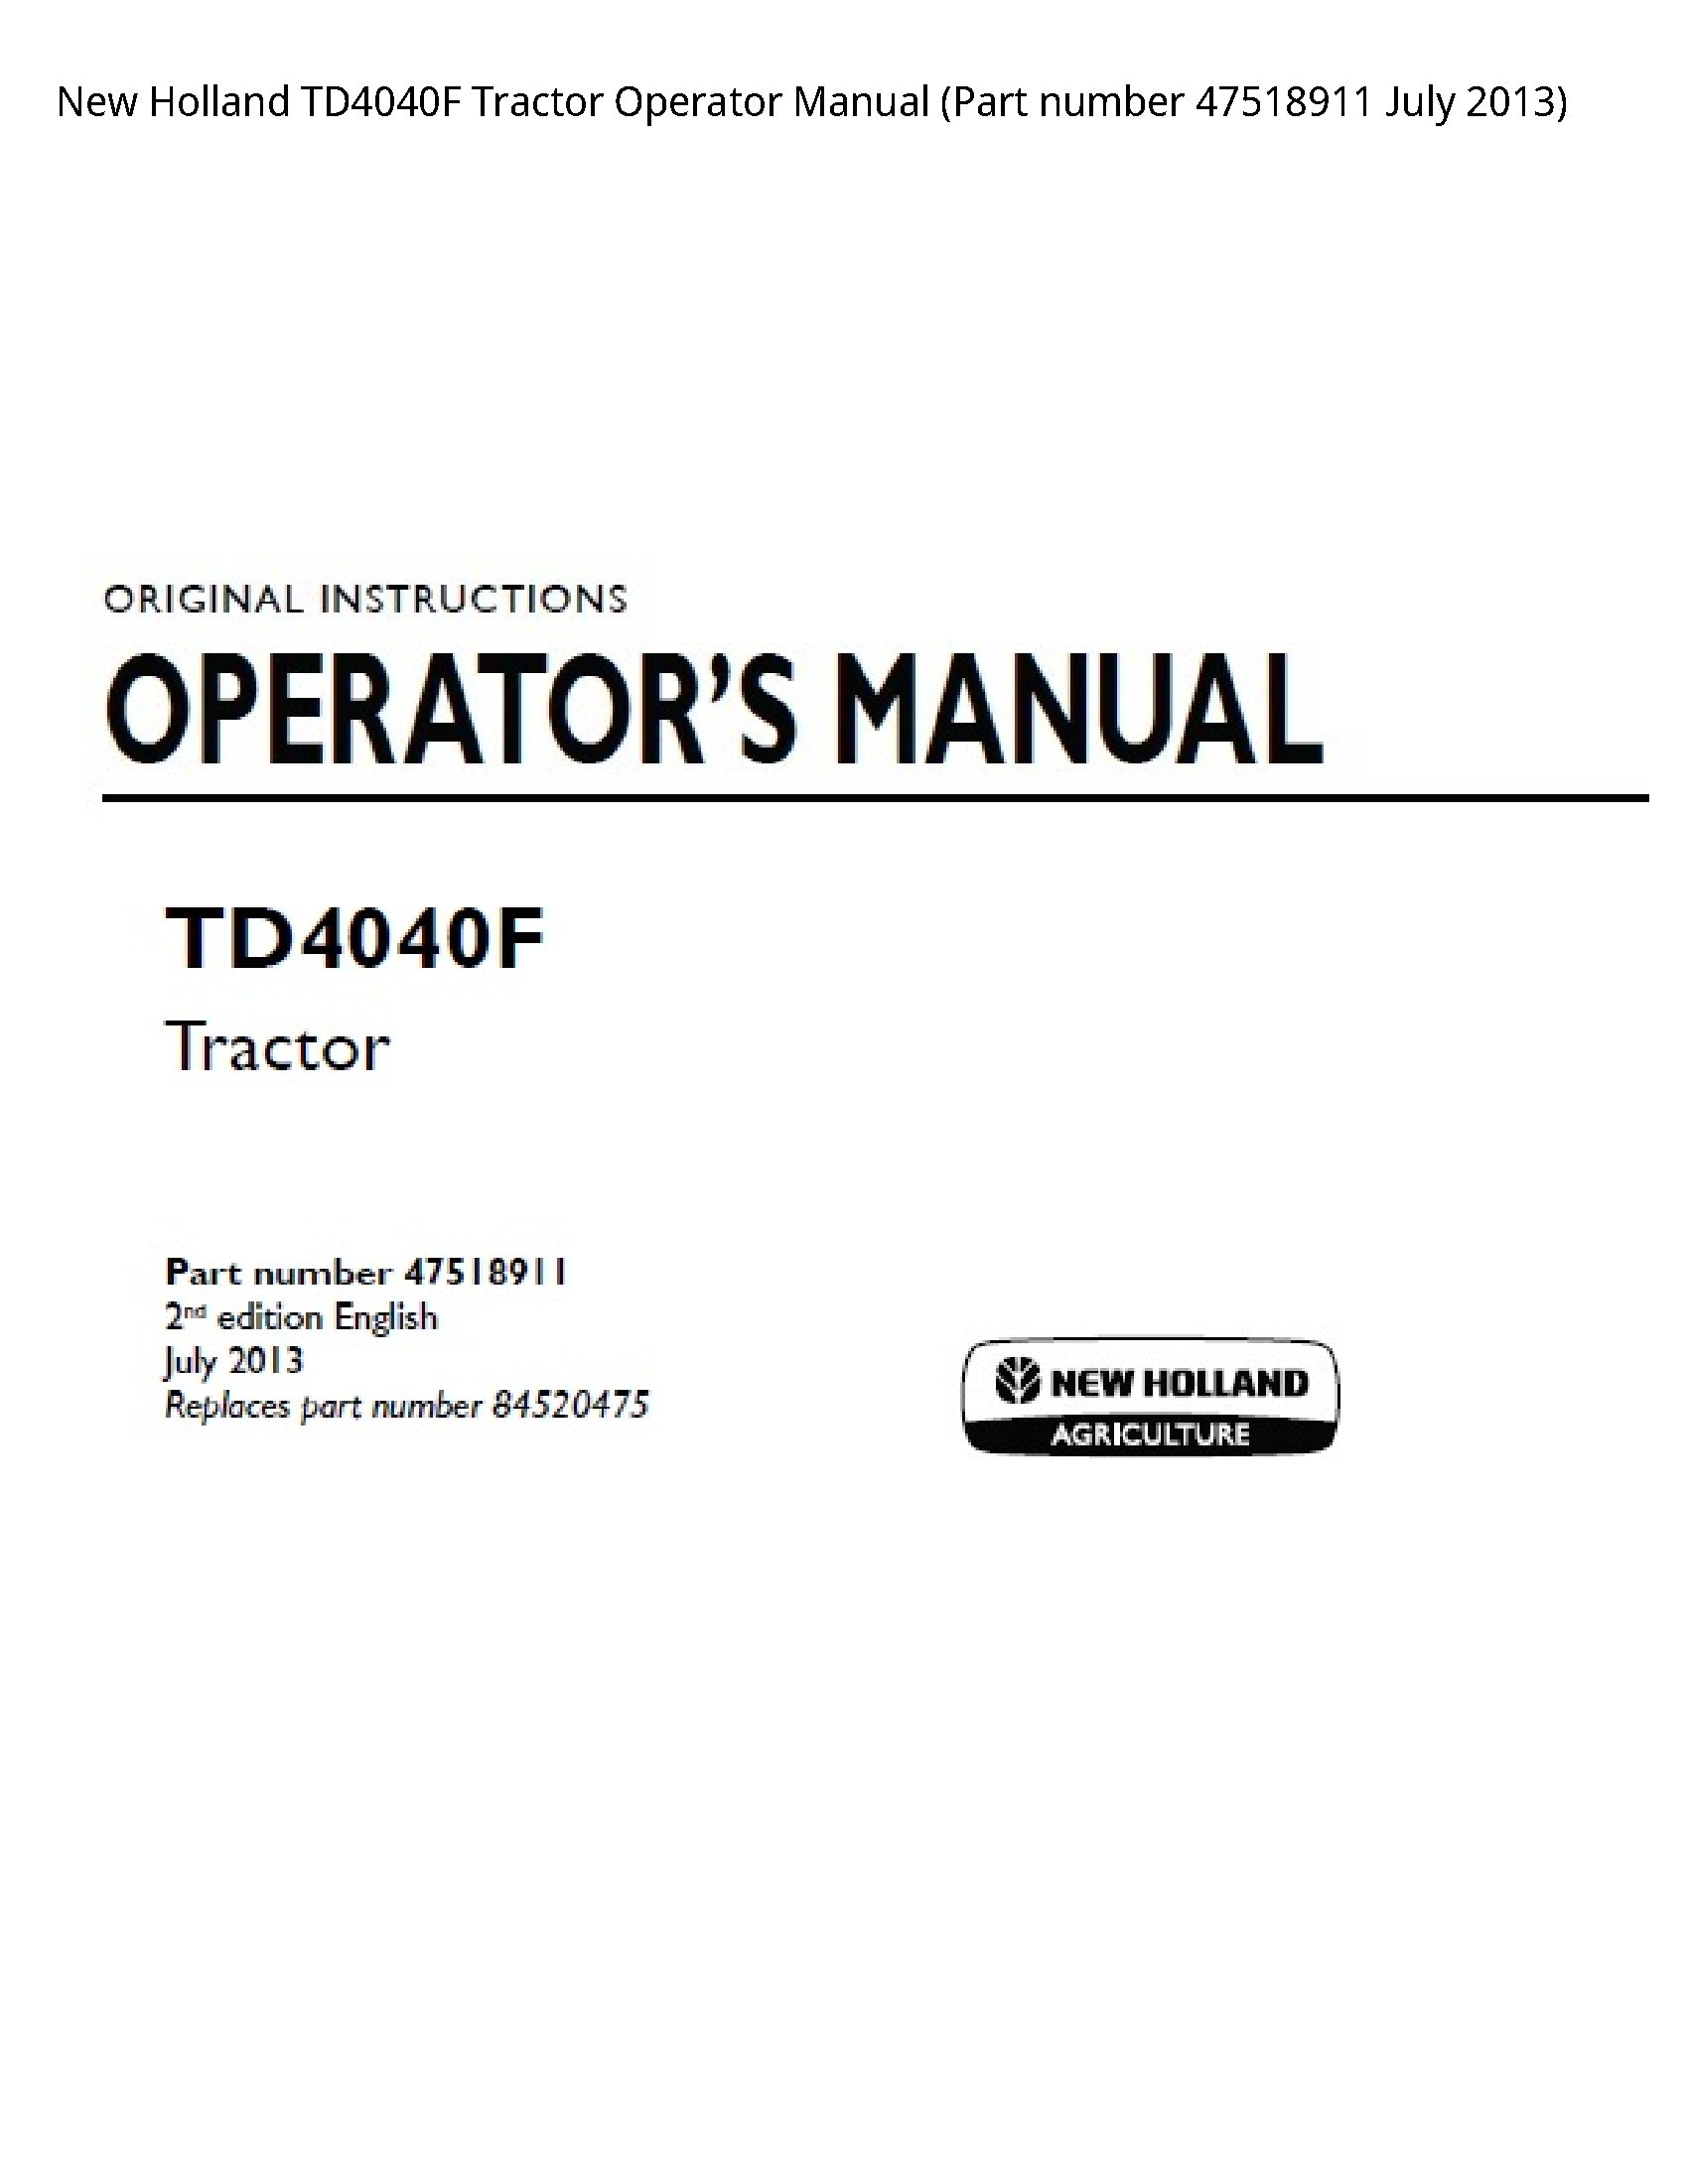 New Holland TD4040F Tractor Operator manual